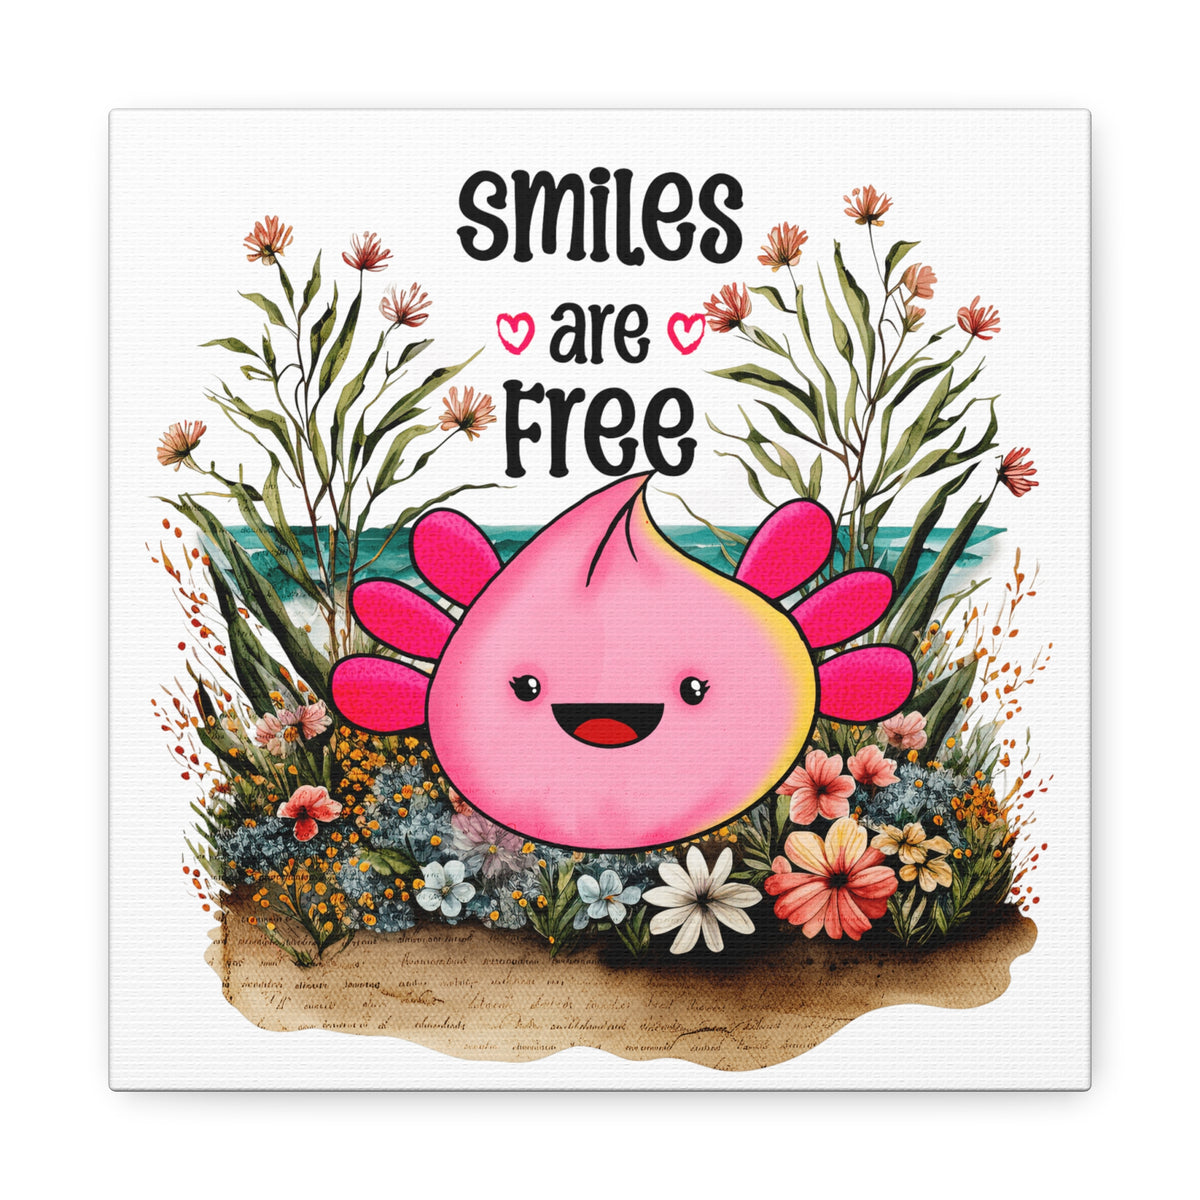 Smiles are Free Pink Smiling Axolotl Canvas Art